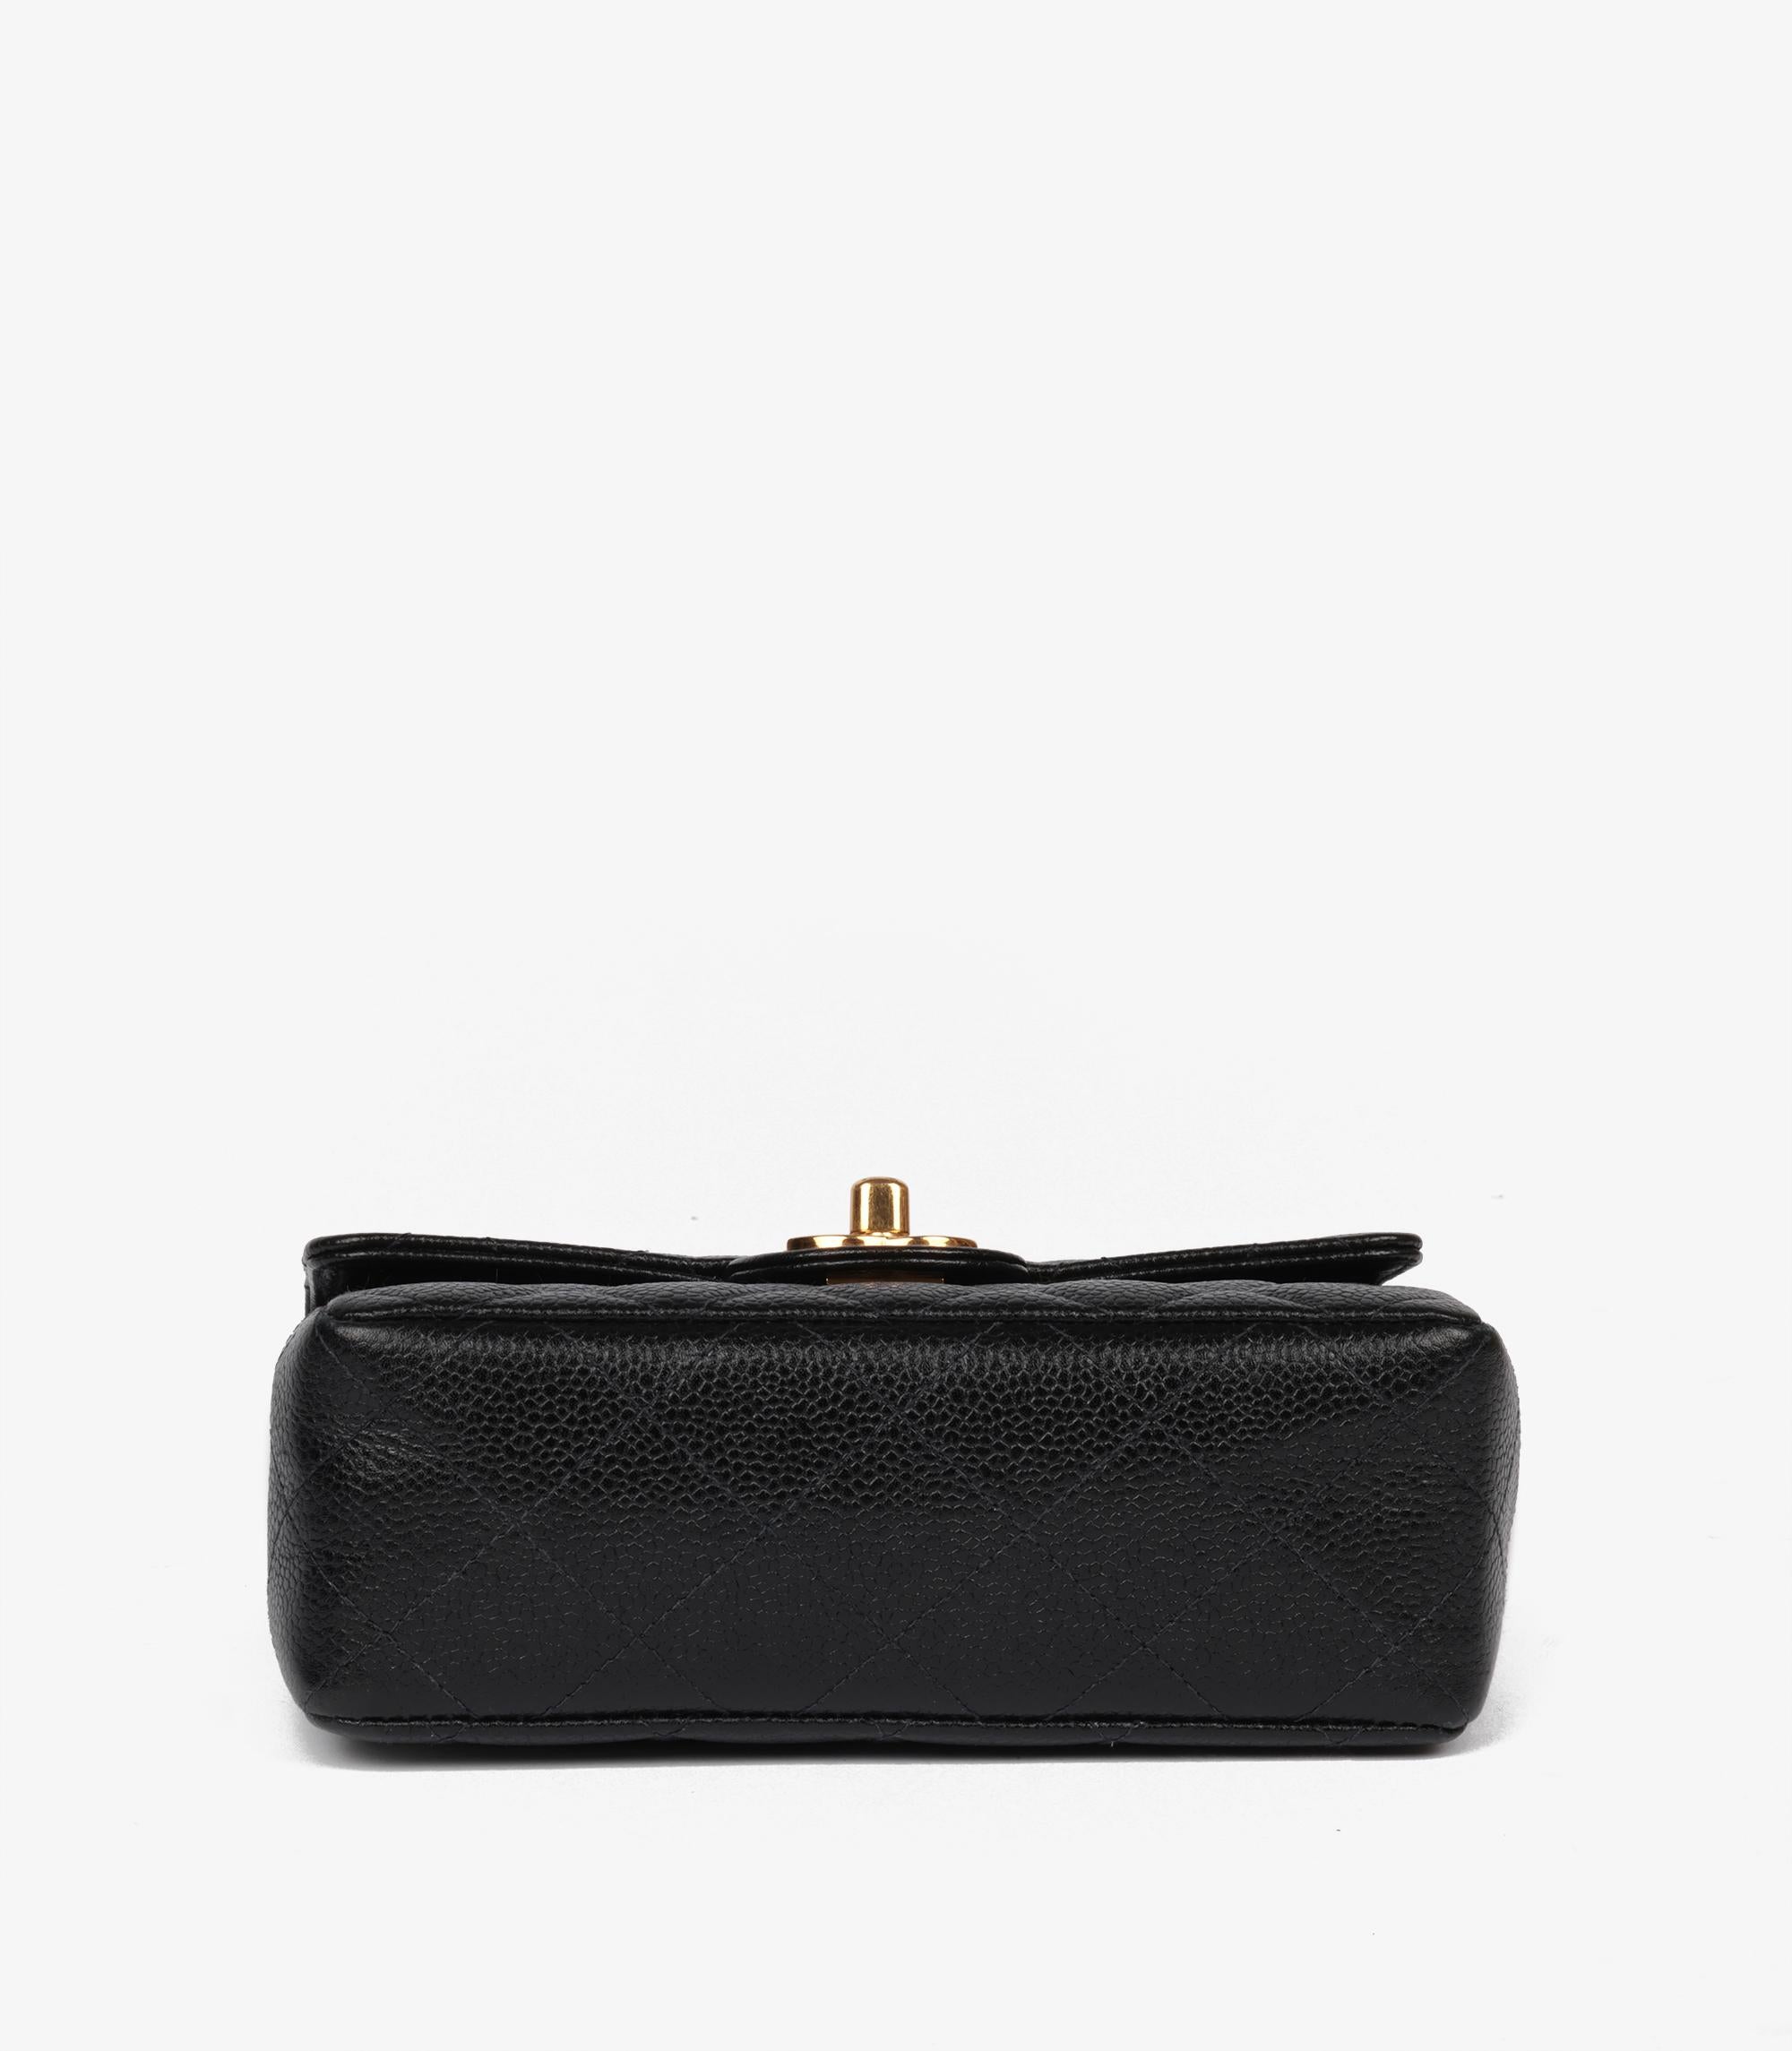 Chanel Black Quilted Caviar Leather Vintage Square Mini Flap Bag 4